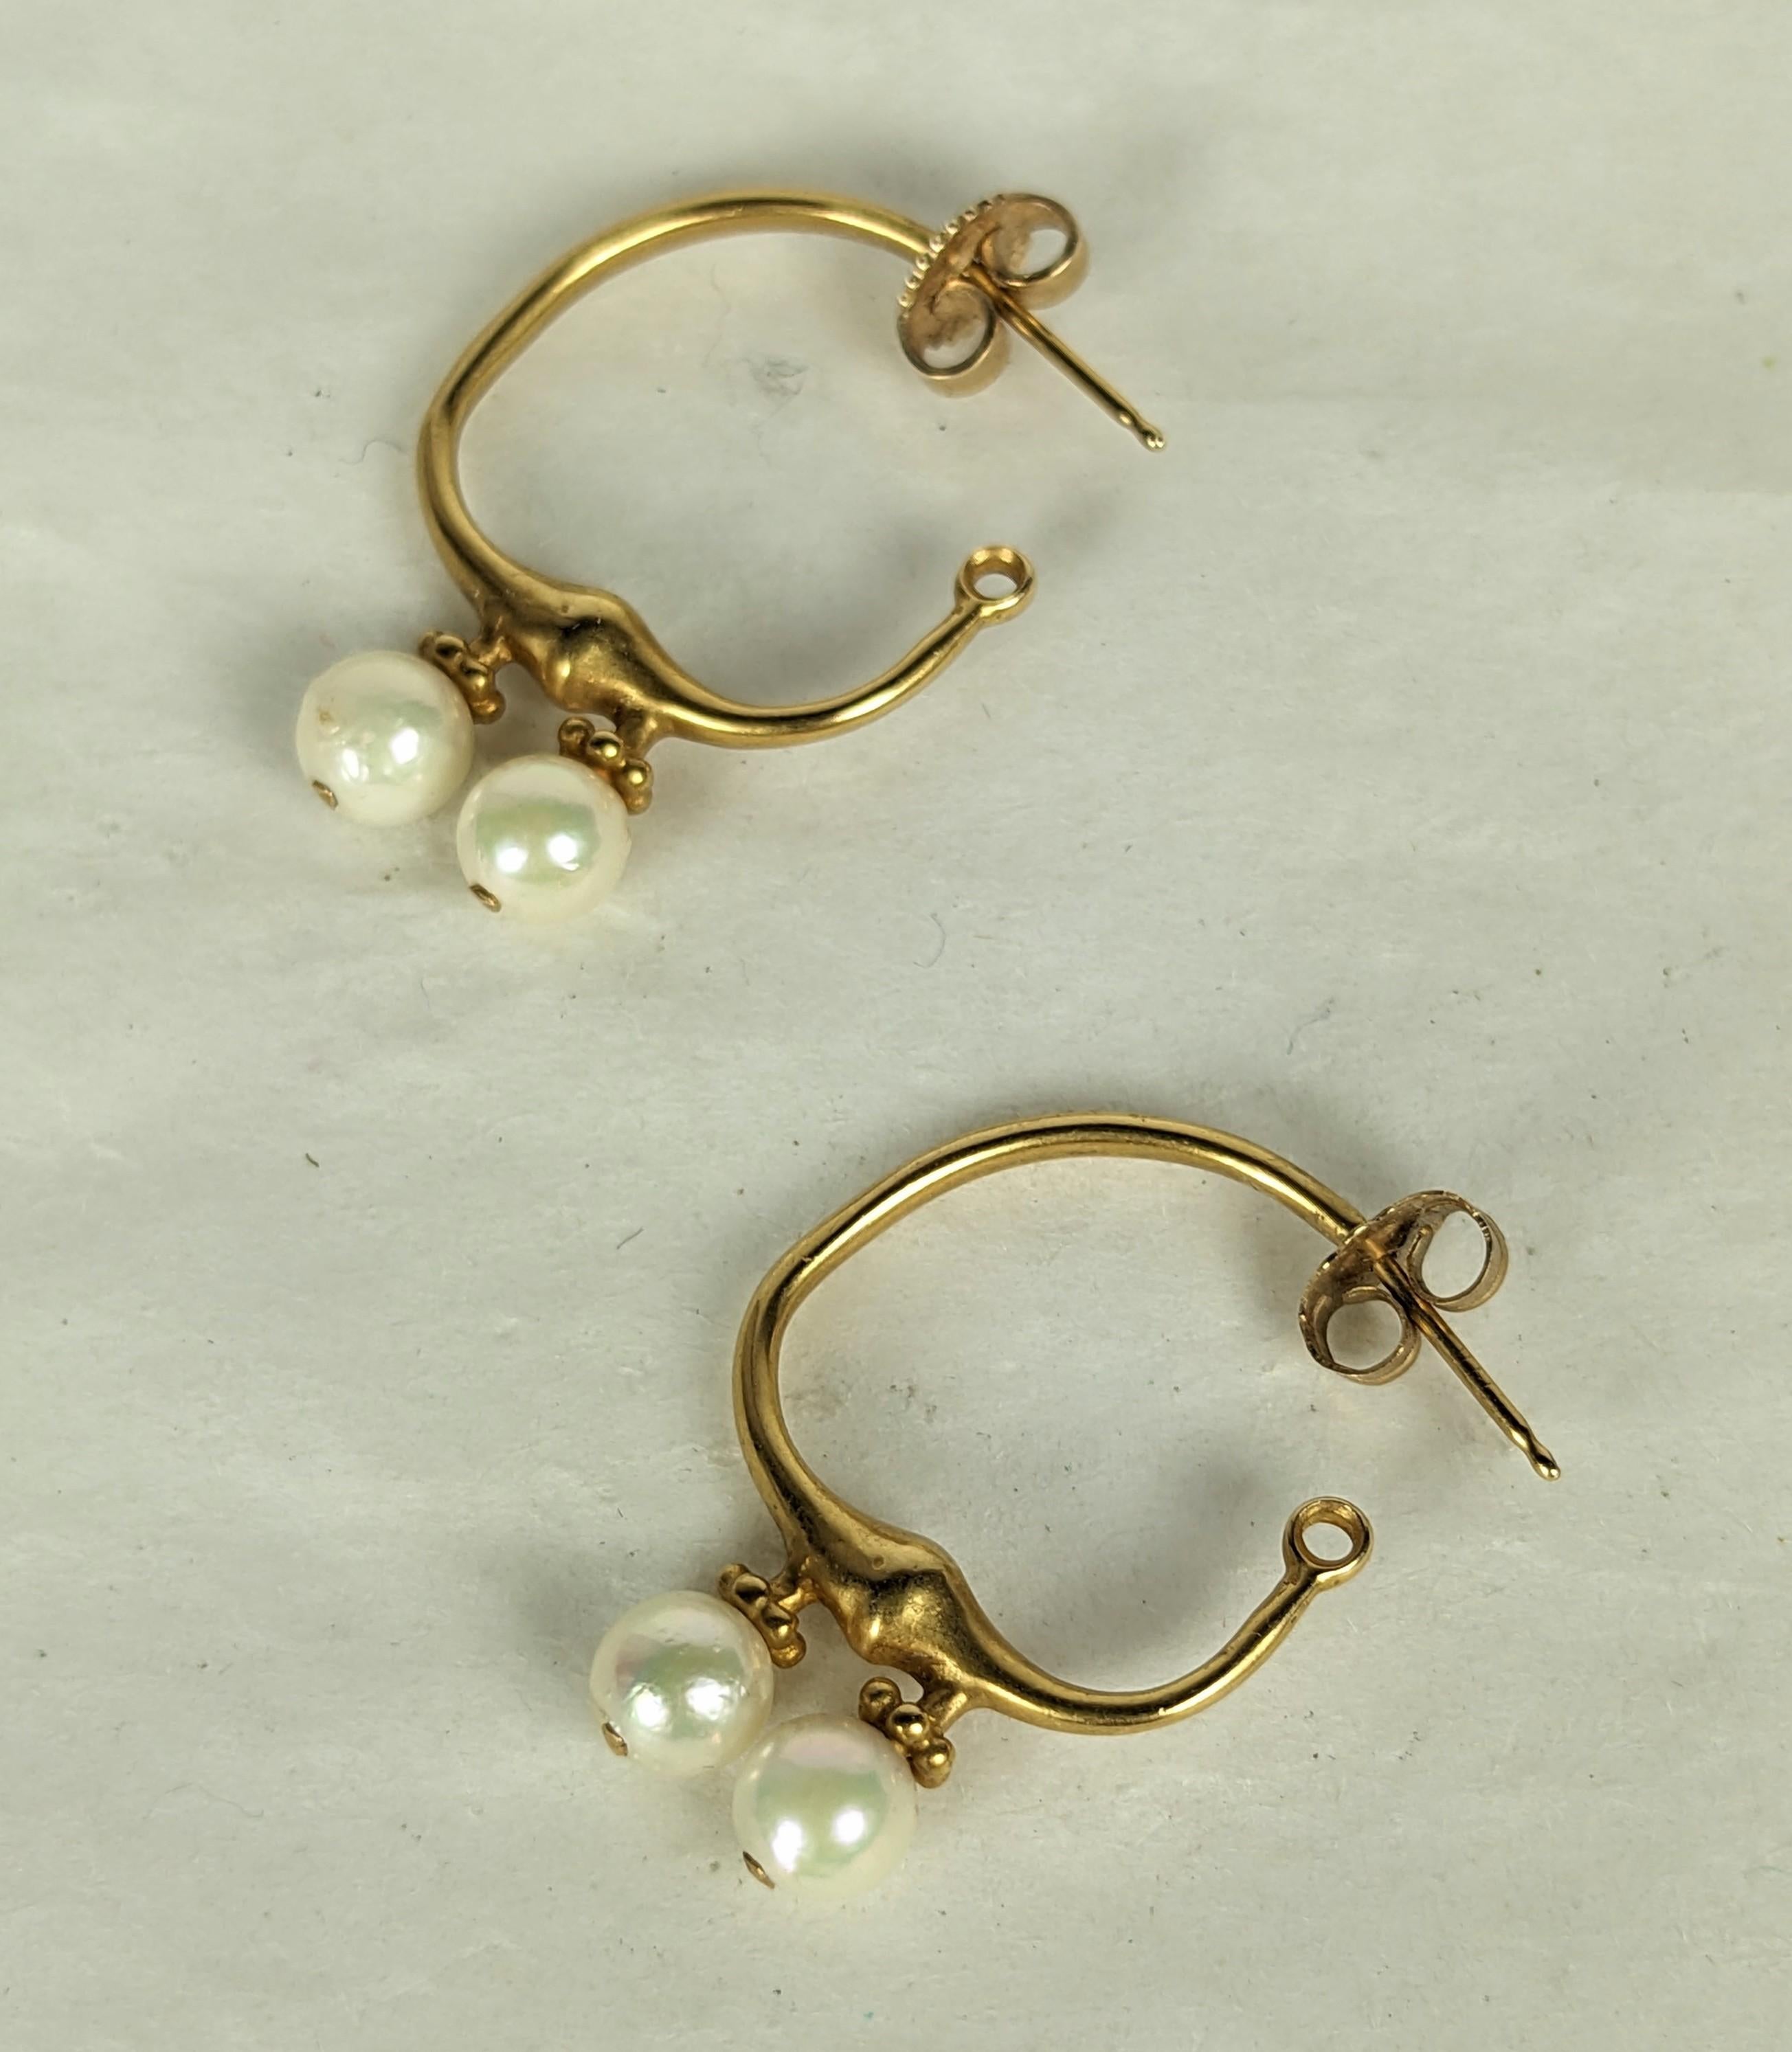 Elegant Artisan Gold and Pearl Earrings from the 1980's in 14k gold with cultured pearls. Handmade in 14k matte gold in an abstracted Ancient hoop form with pierced fittings. 1